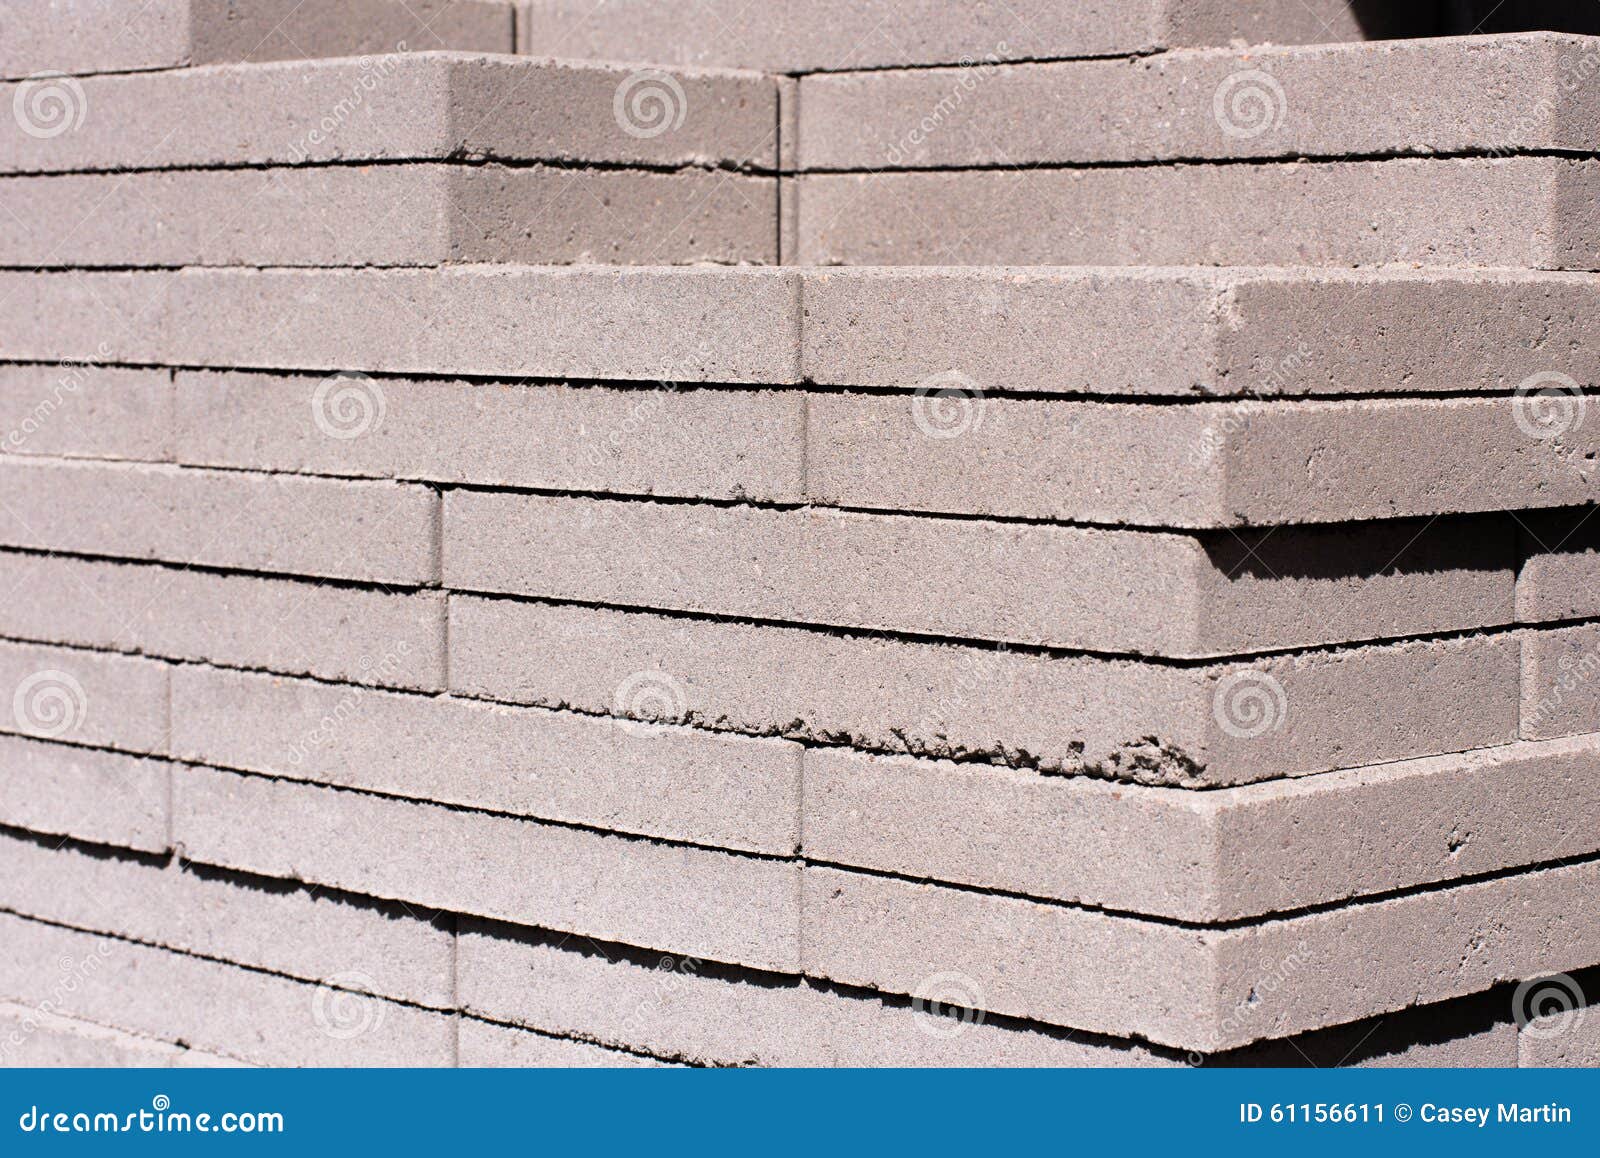 outdoor building materials: stacked concrete masonry